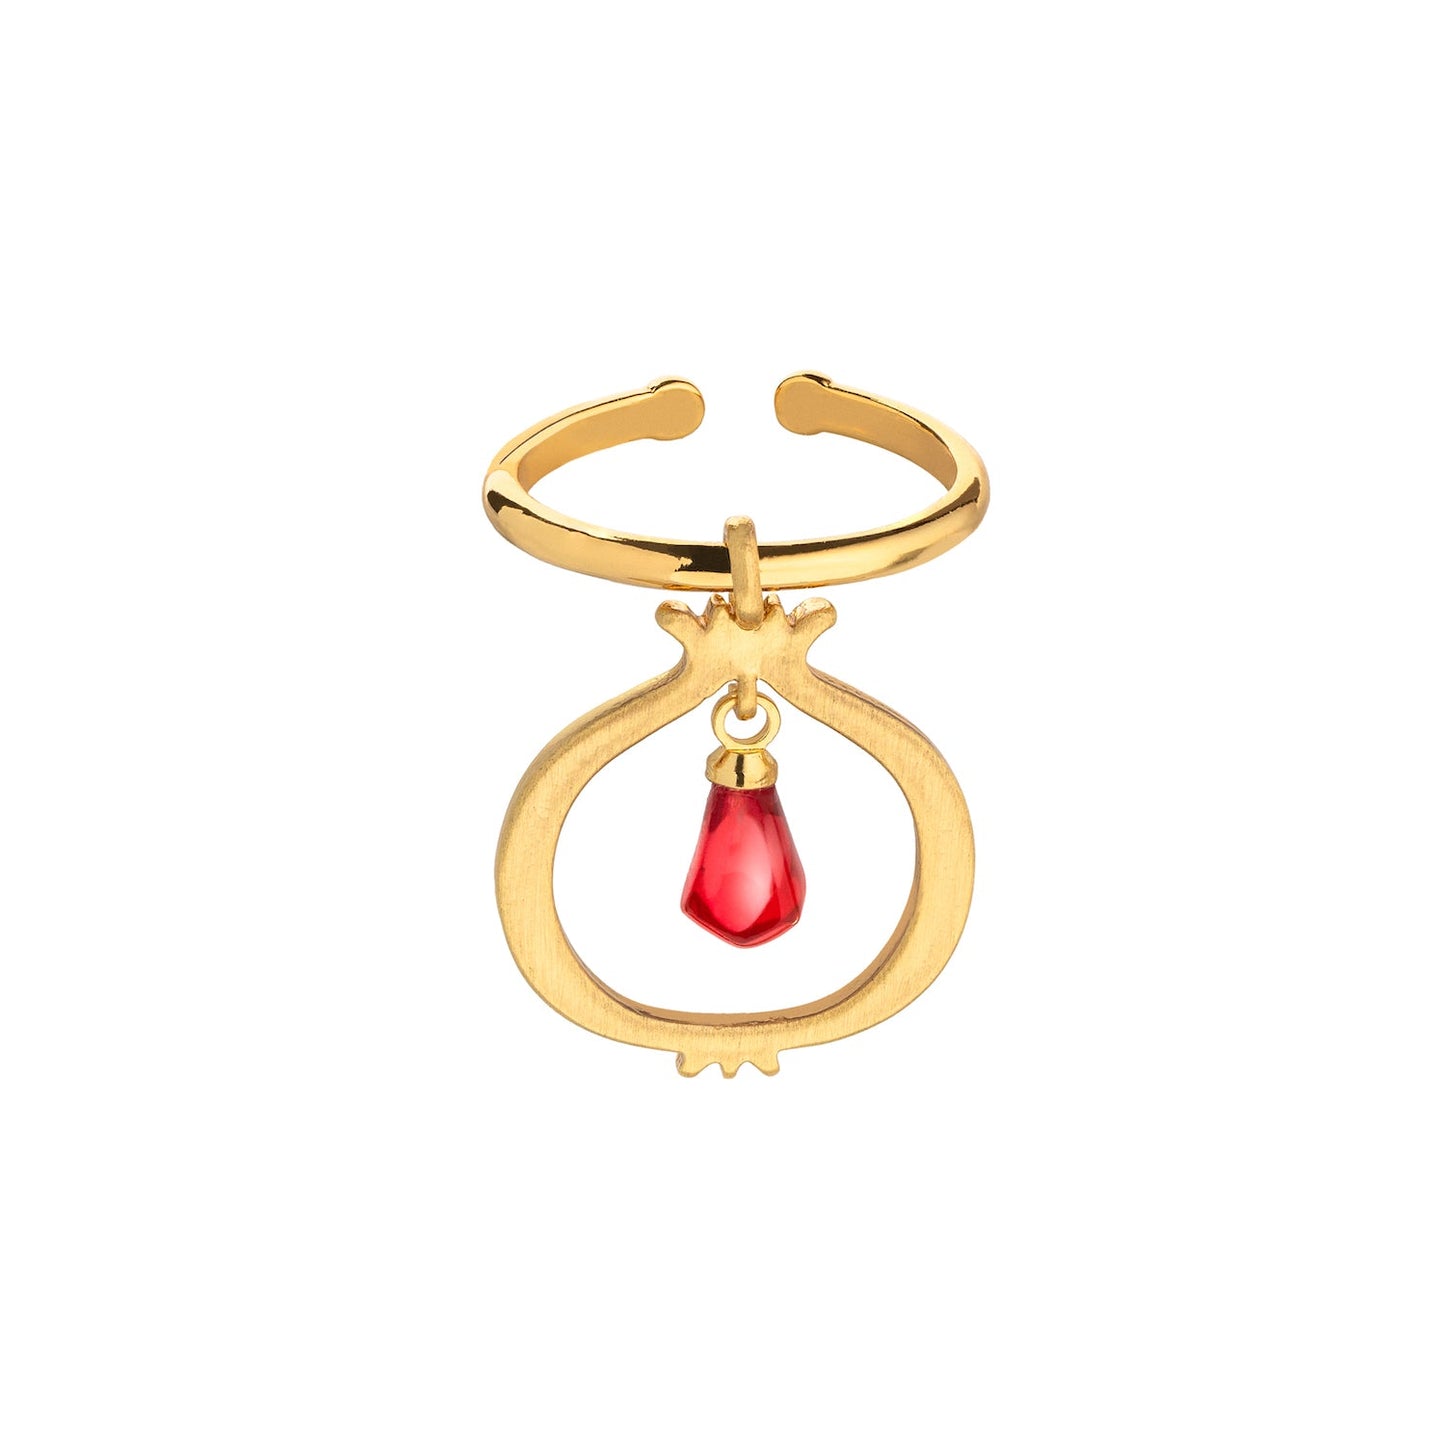 Pomegranate ring - Lusanet Collective